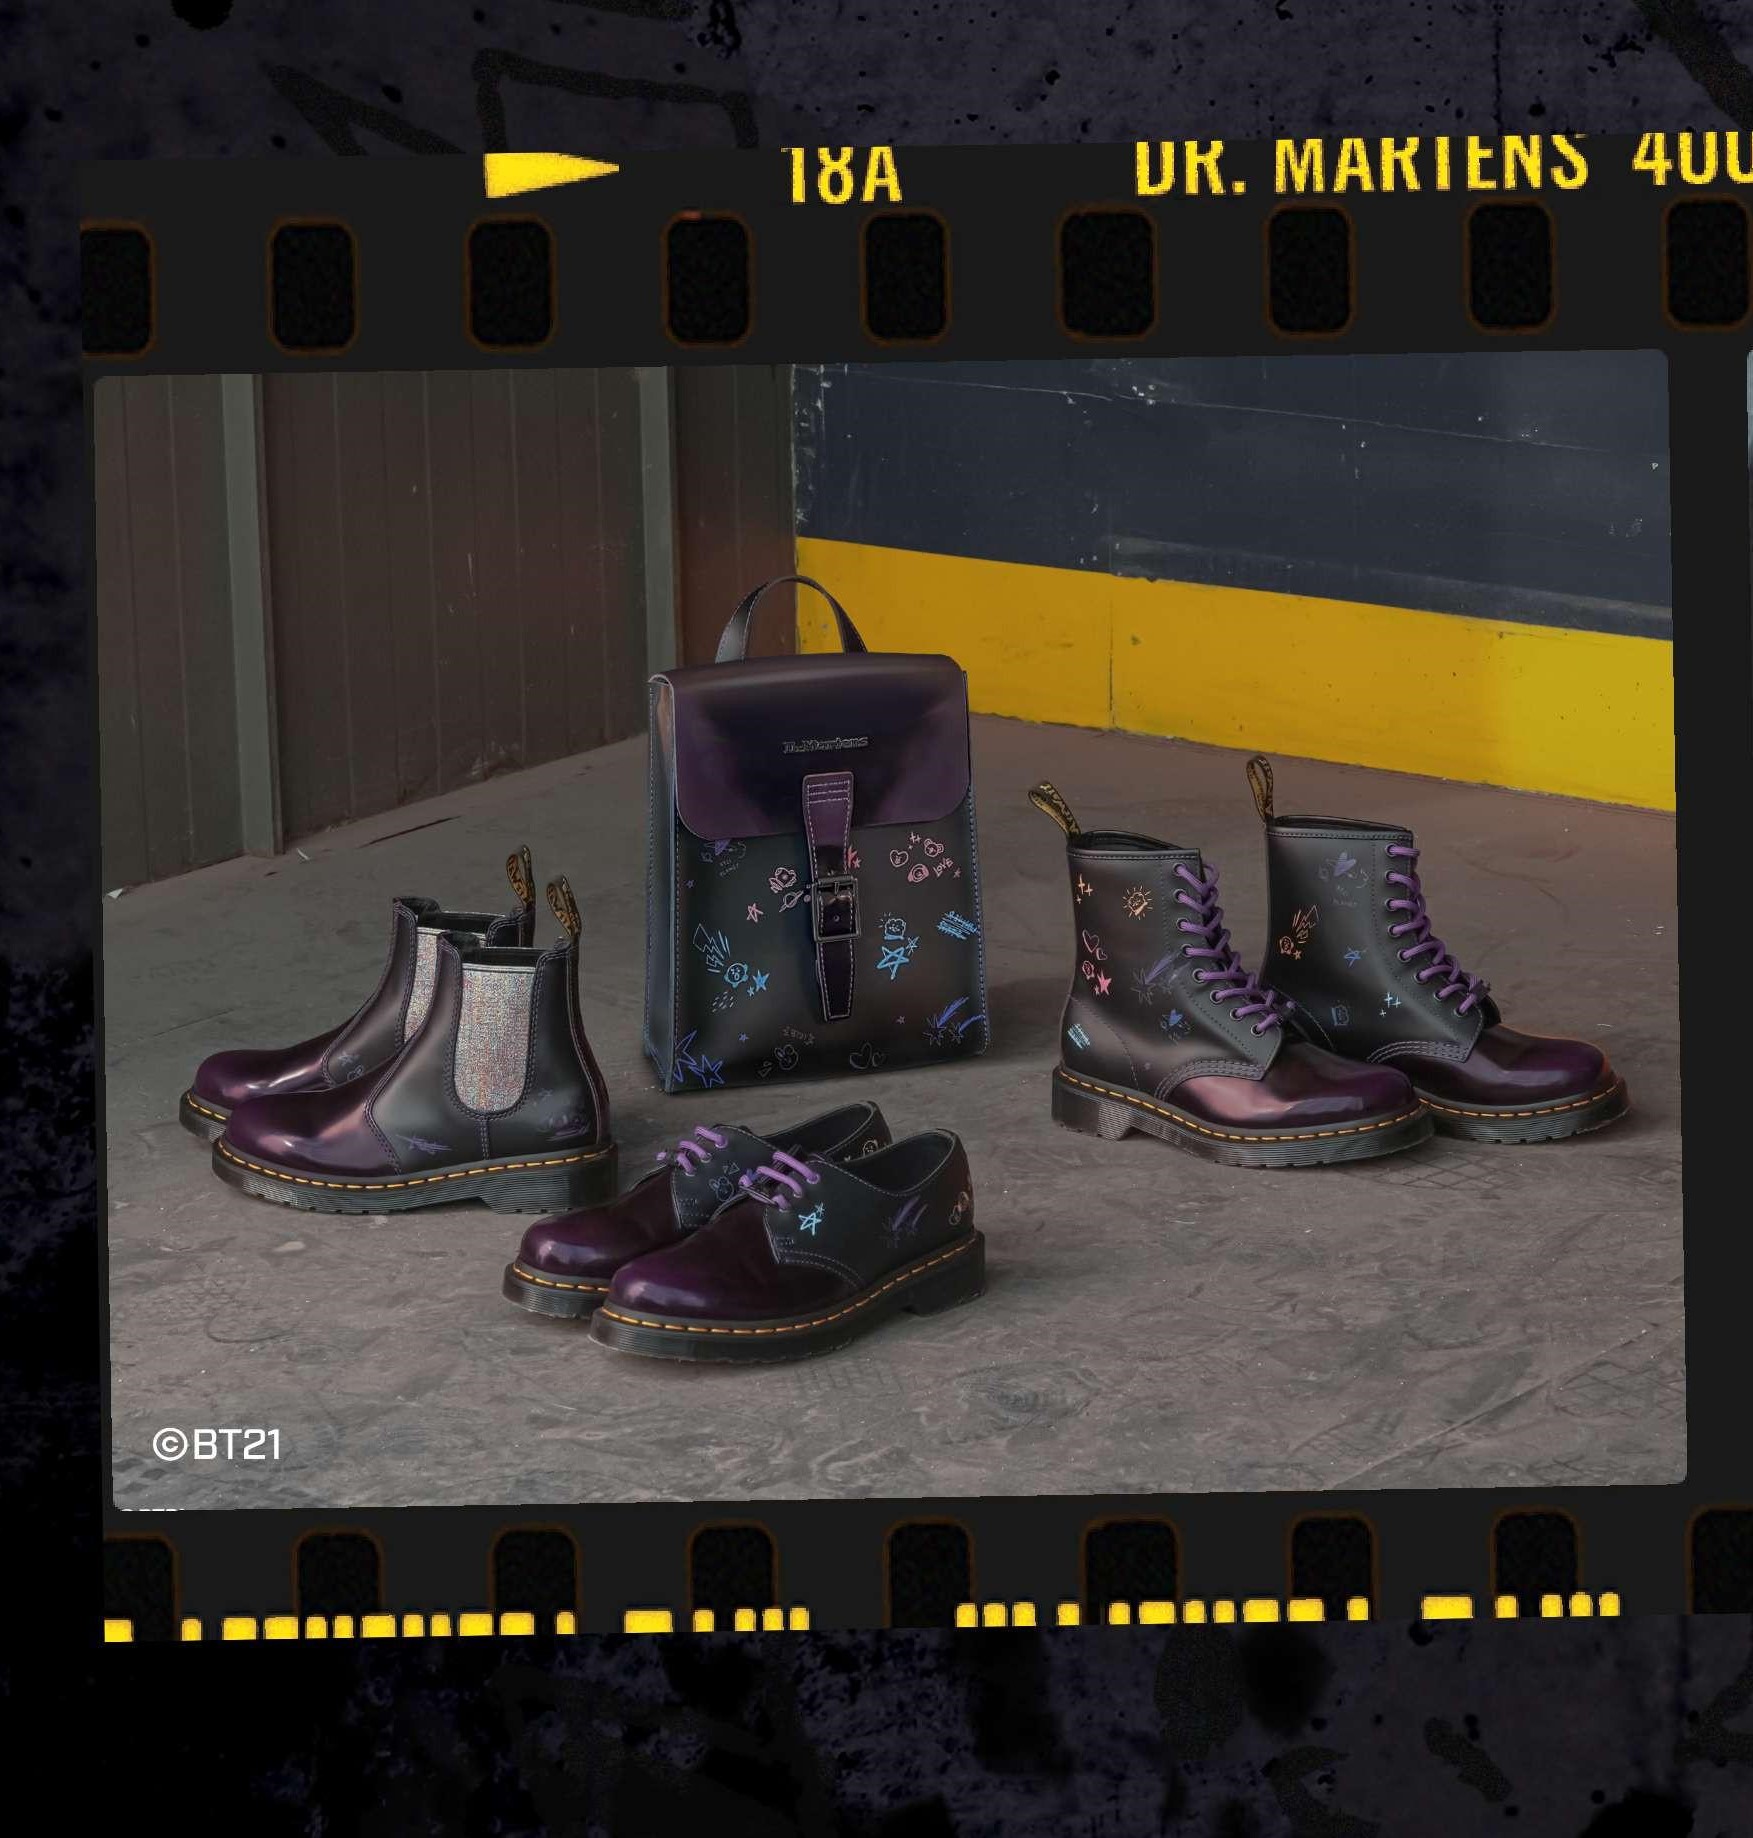 Dr. Martens x BT21 Collab Has Boots & Backpacks For ARMYs